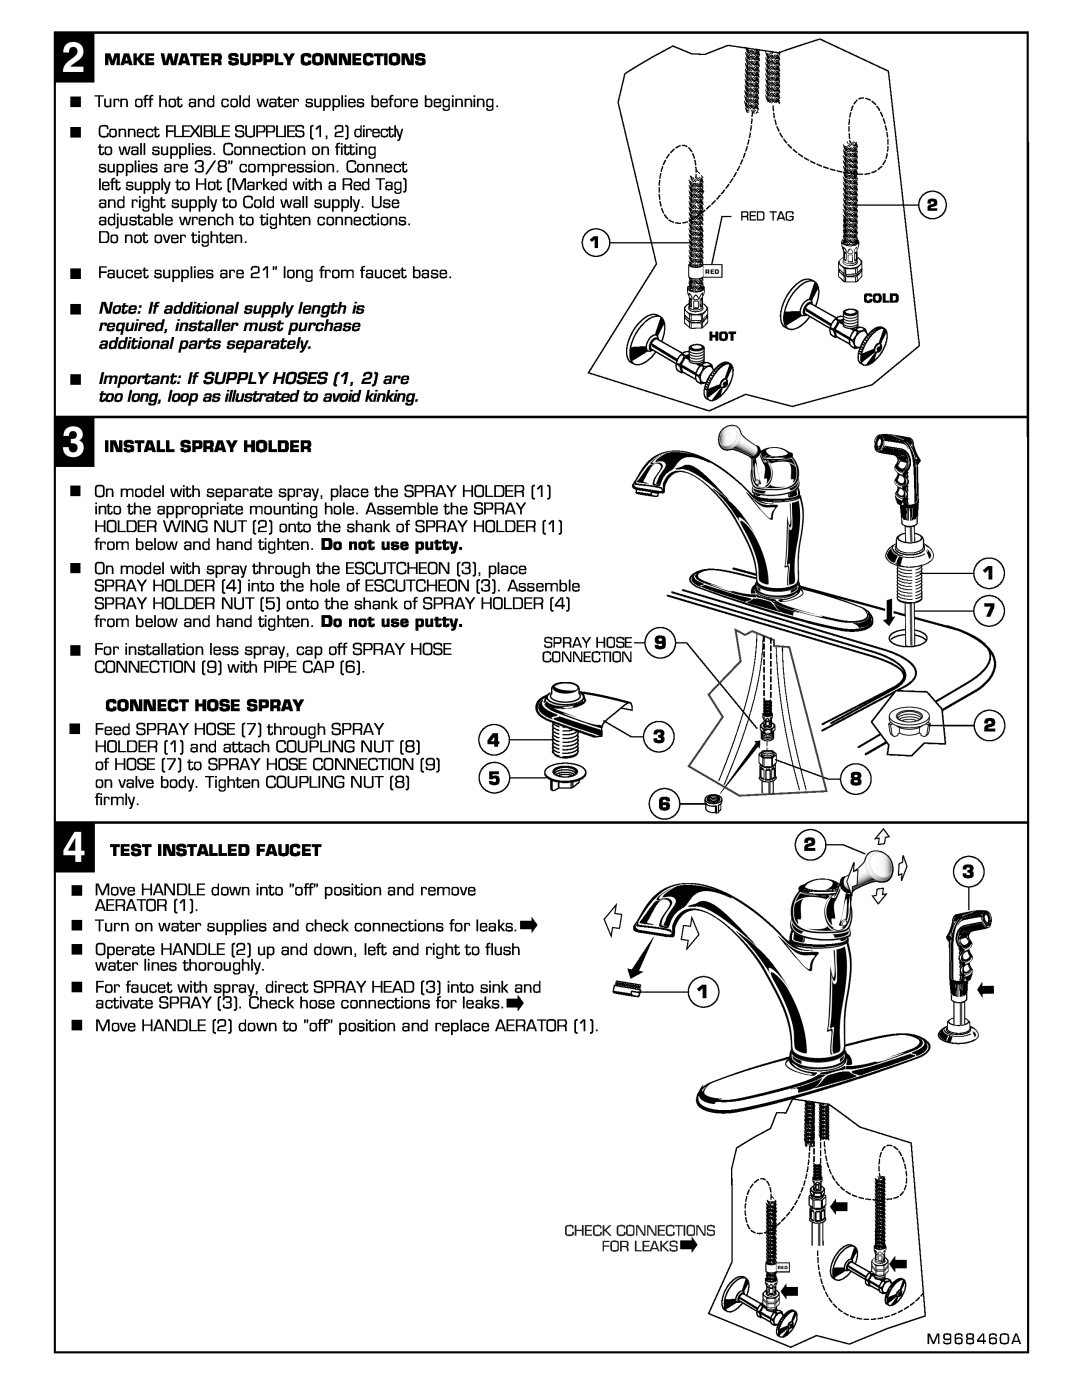 American Standard 4243 Make Water Supply Connections, Install Spray Holder, Connect Hose Spray, Test Installed Faucet 